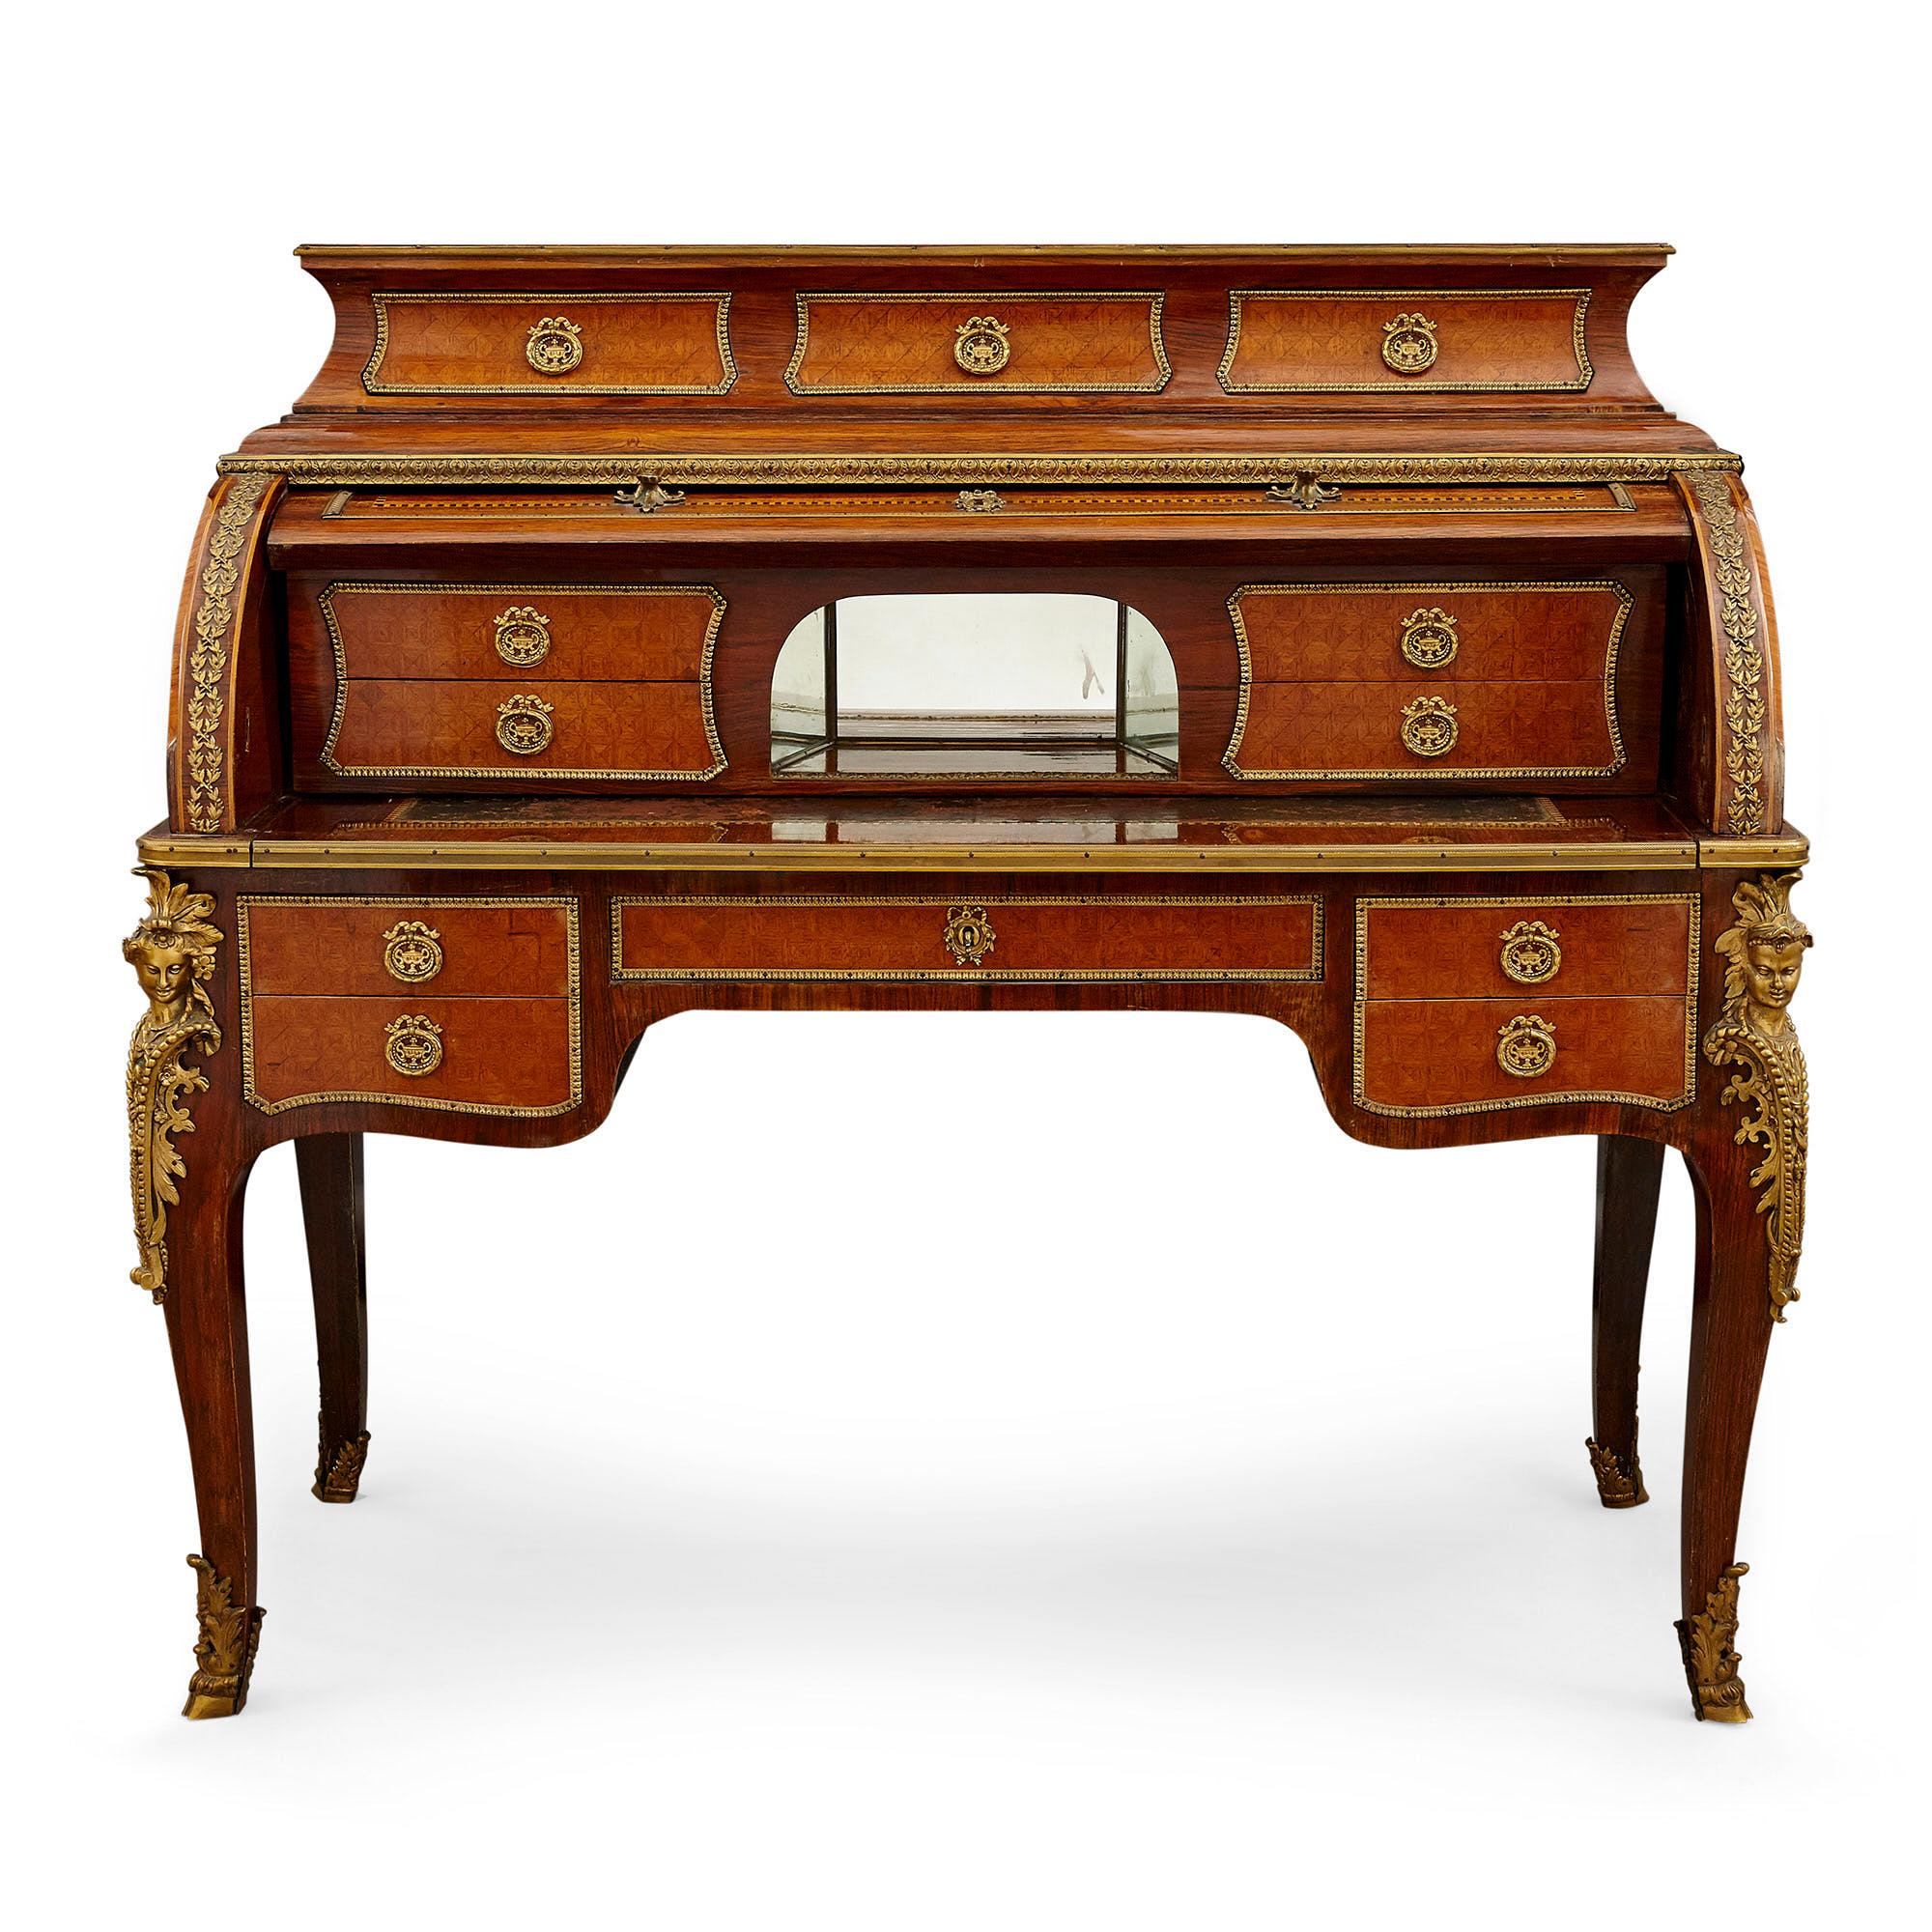 Transitional style gilt bronze mounted roll top bureau
French, 19th century
Measures: Height 121cm, width 135cm, depth 59cm

This fine roll top bureau is of traditional form and demonstrates the best of the Transitional style. The desk features